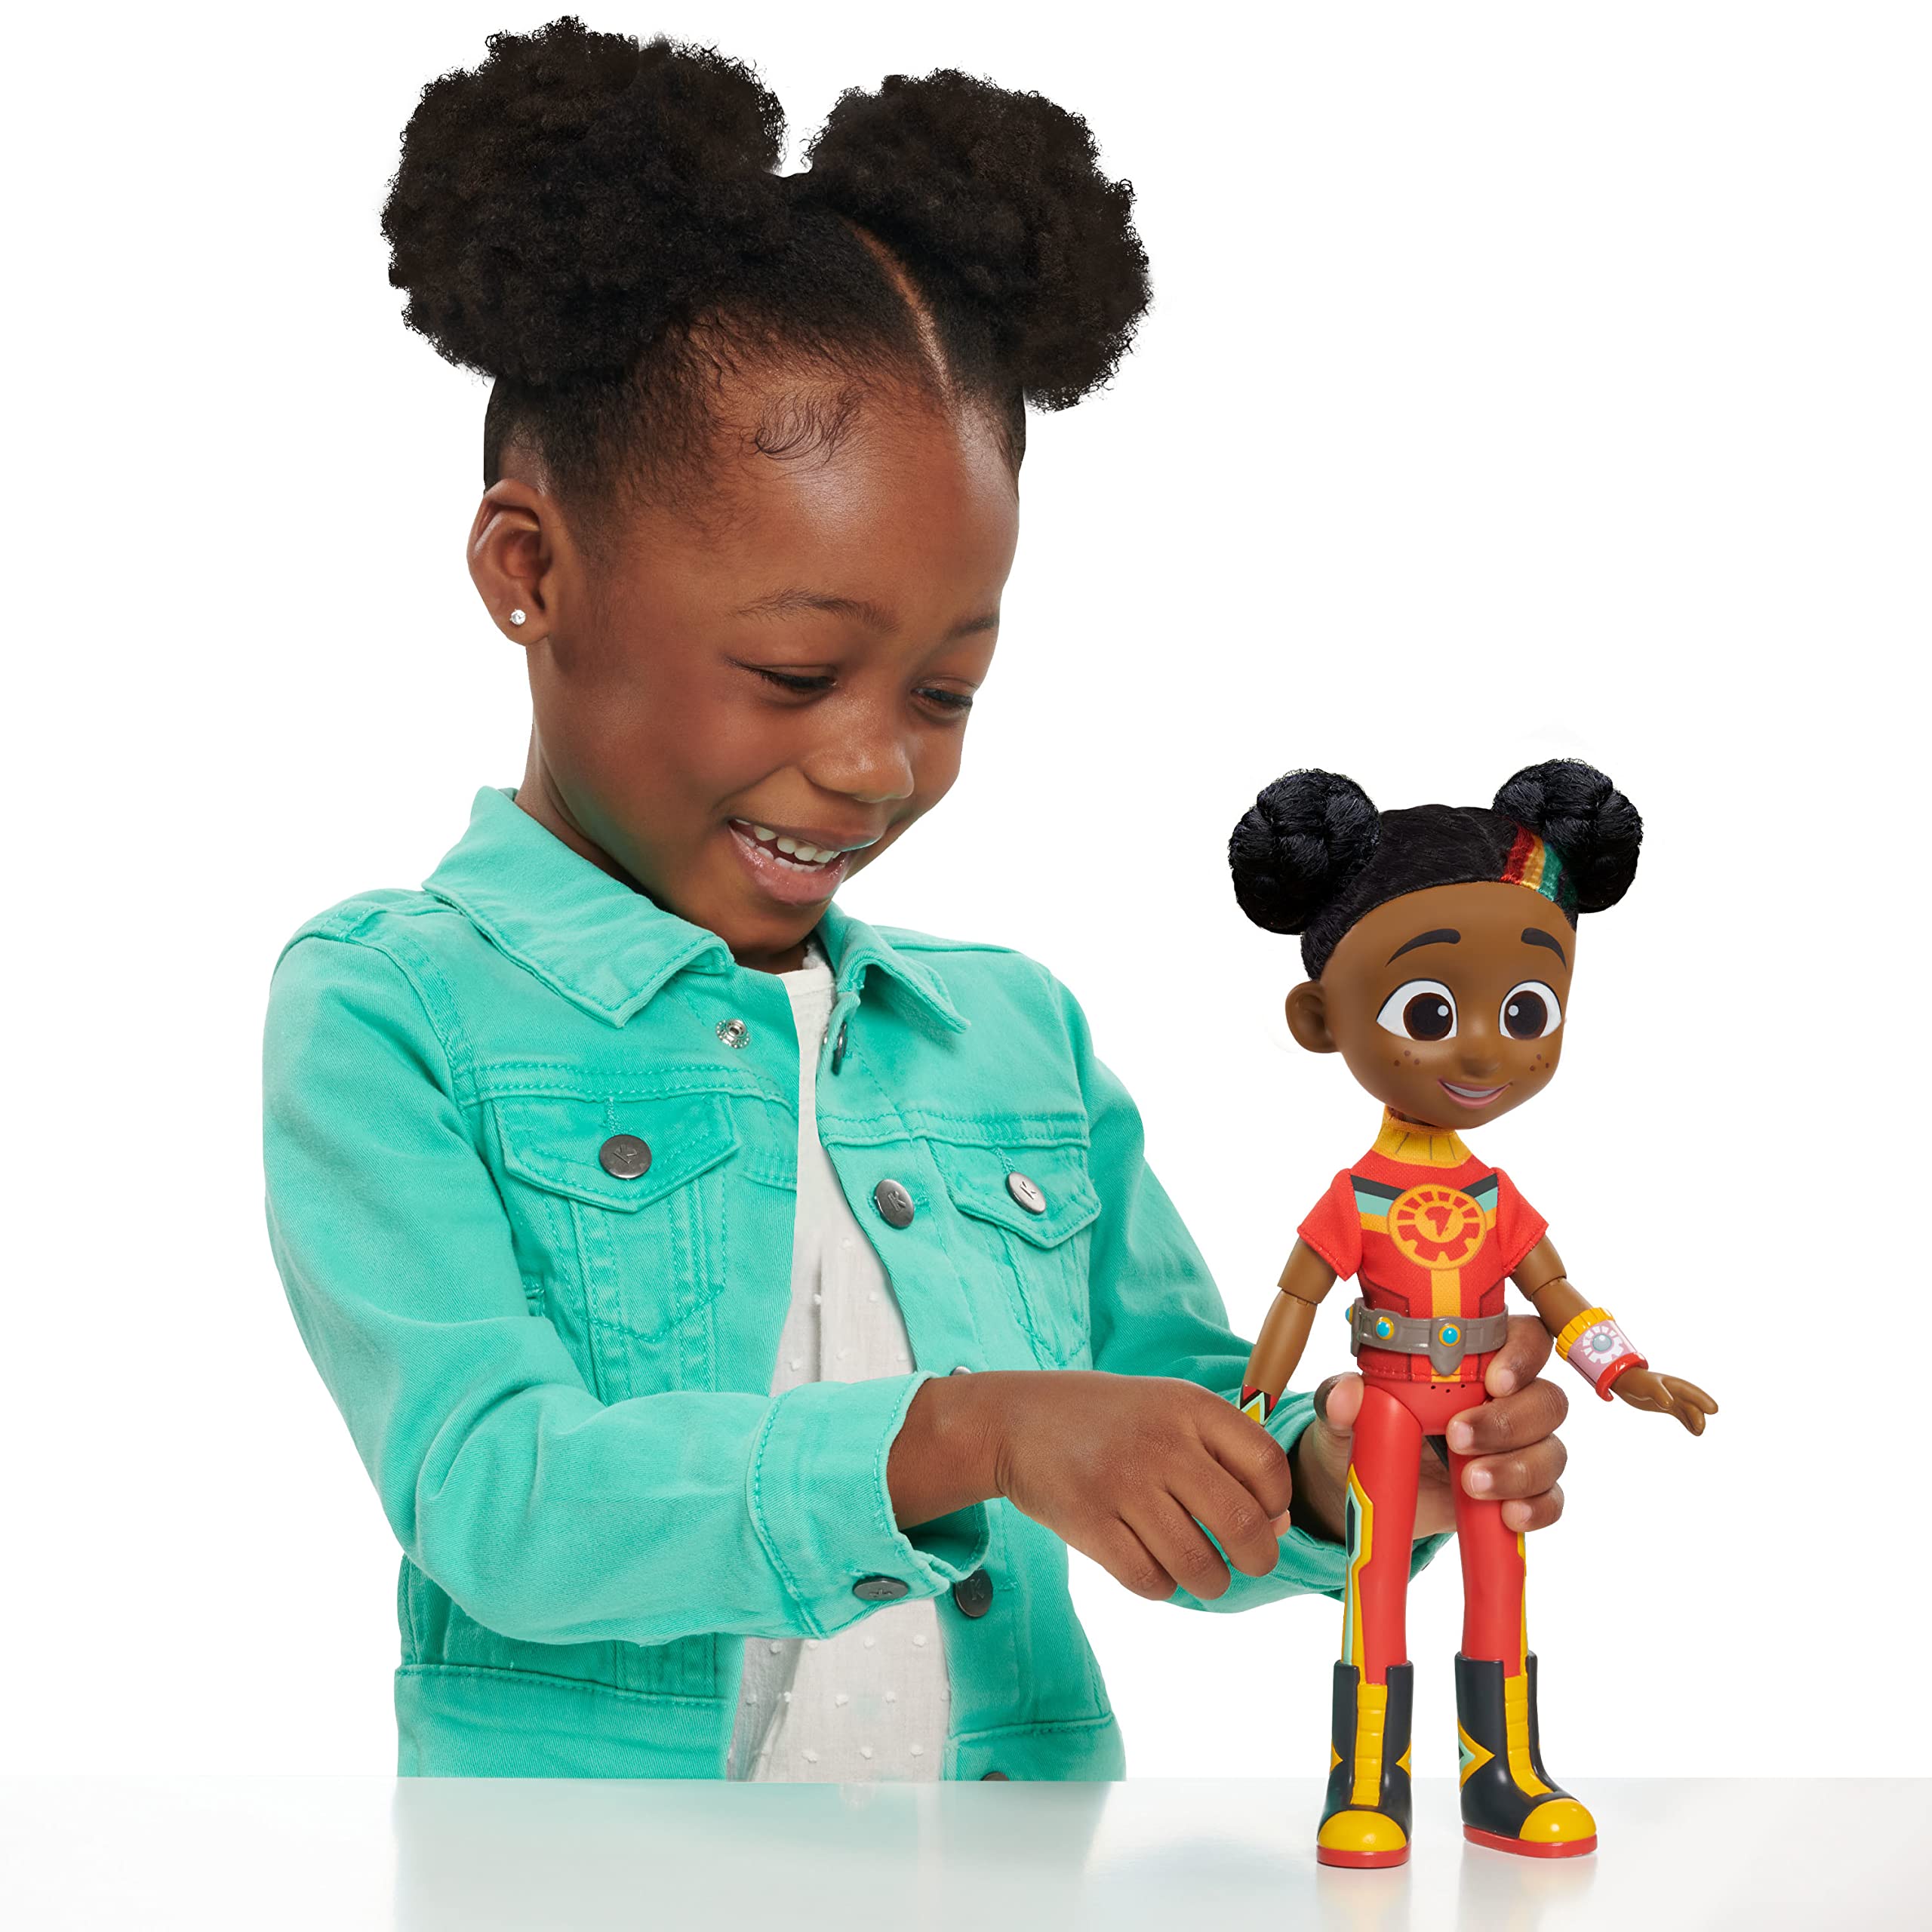 SUPER SEMA 12-inch Talking and Singing Doll and Accessories, Kids Toys for Ages 3 Up, Gifts and Presents by Just Play